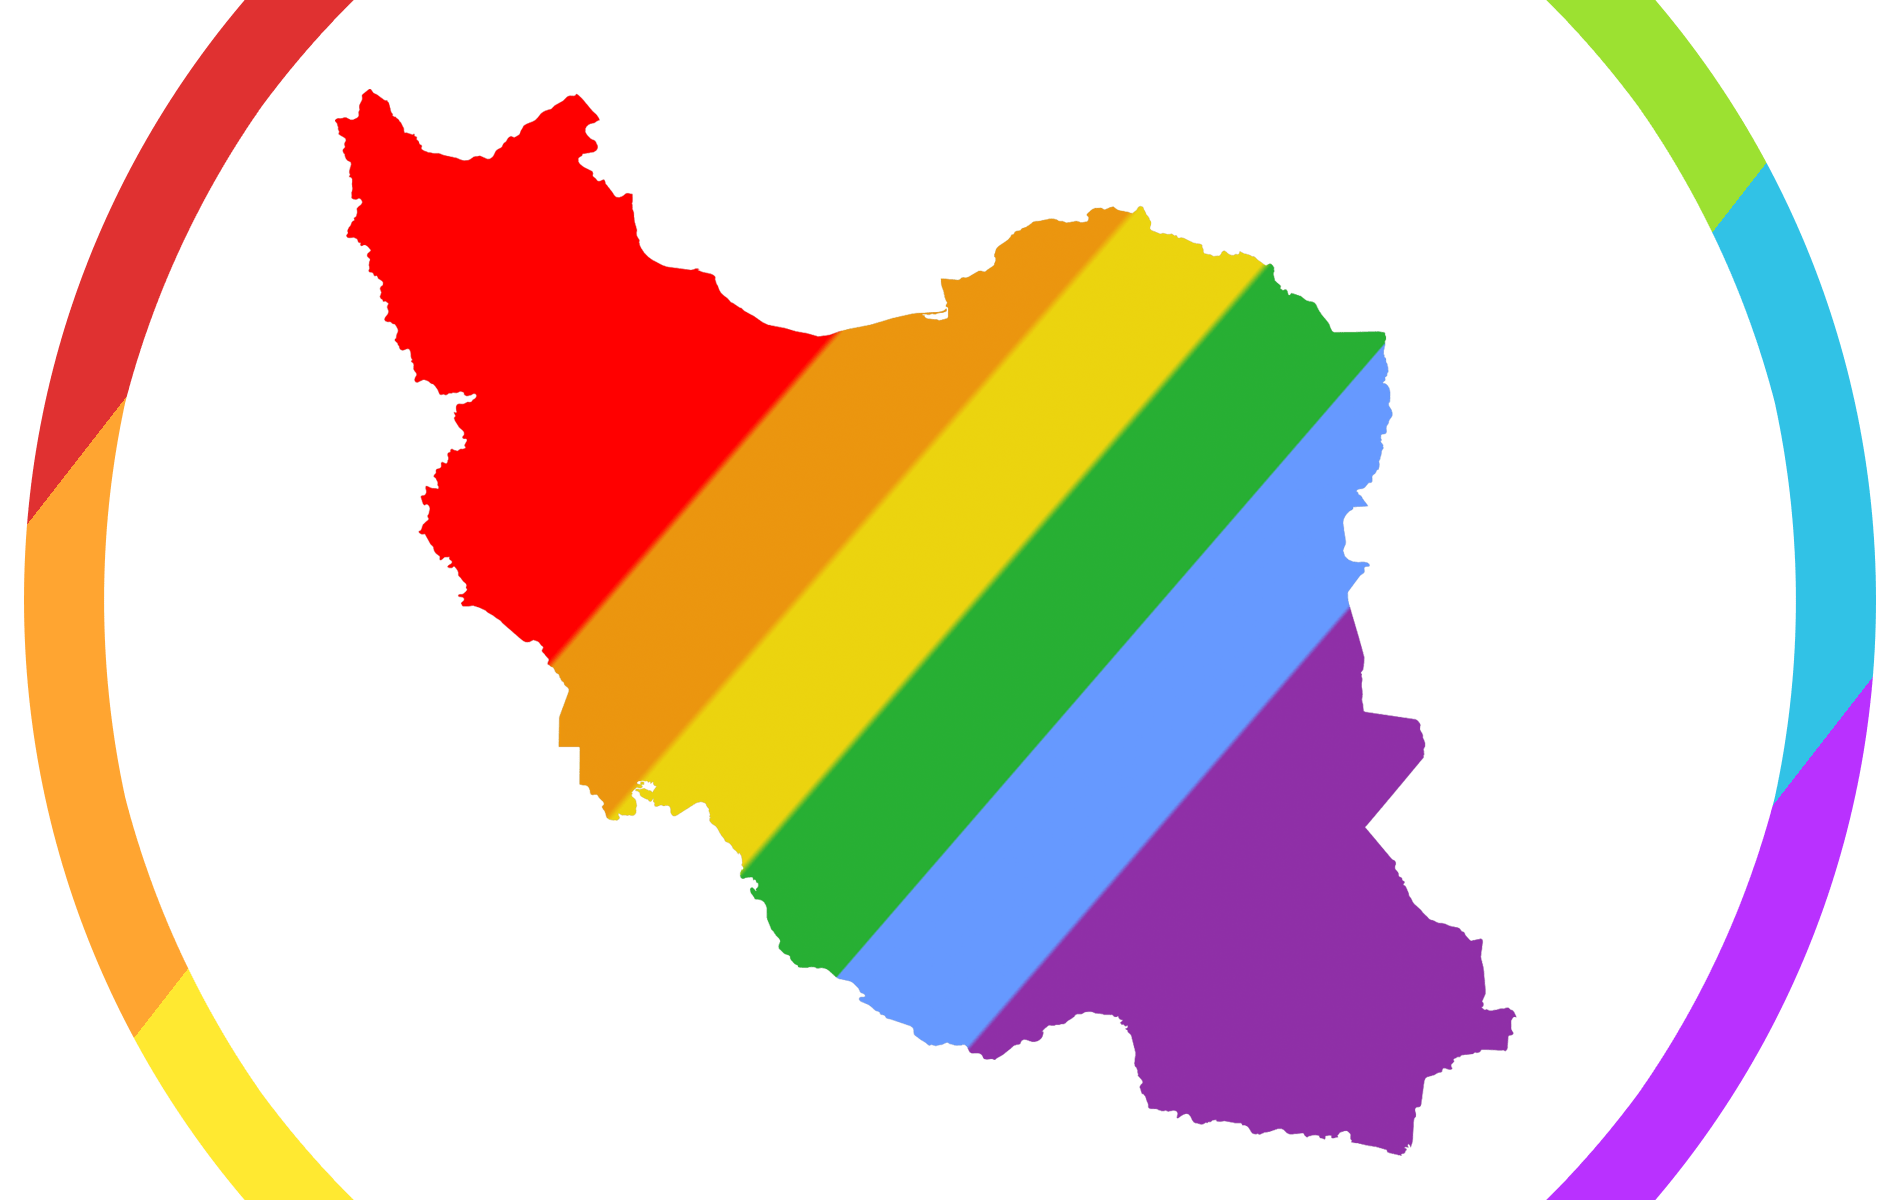 Iran Pride Logo - A circle around the map of Iran that is filled with rainbow flag colors